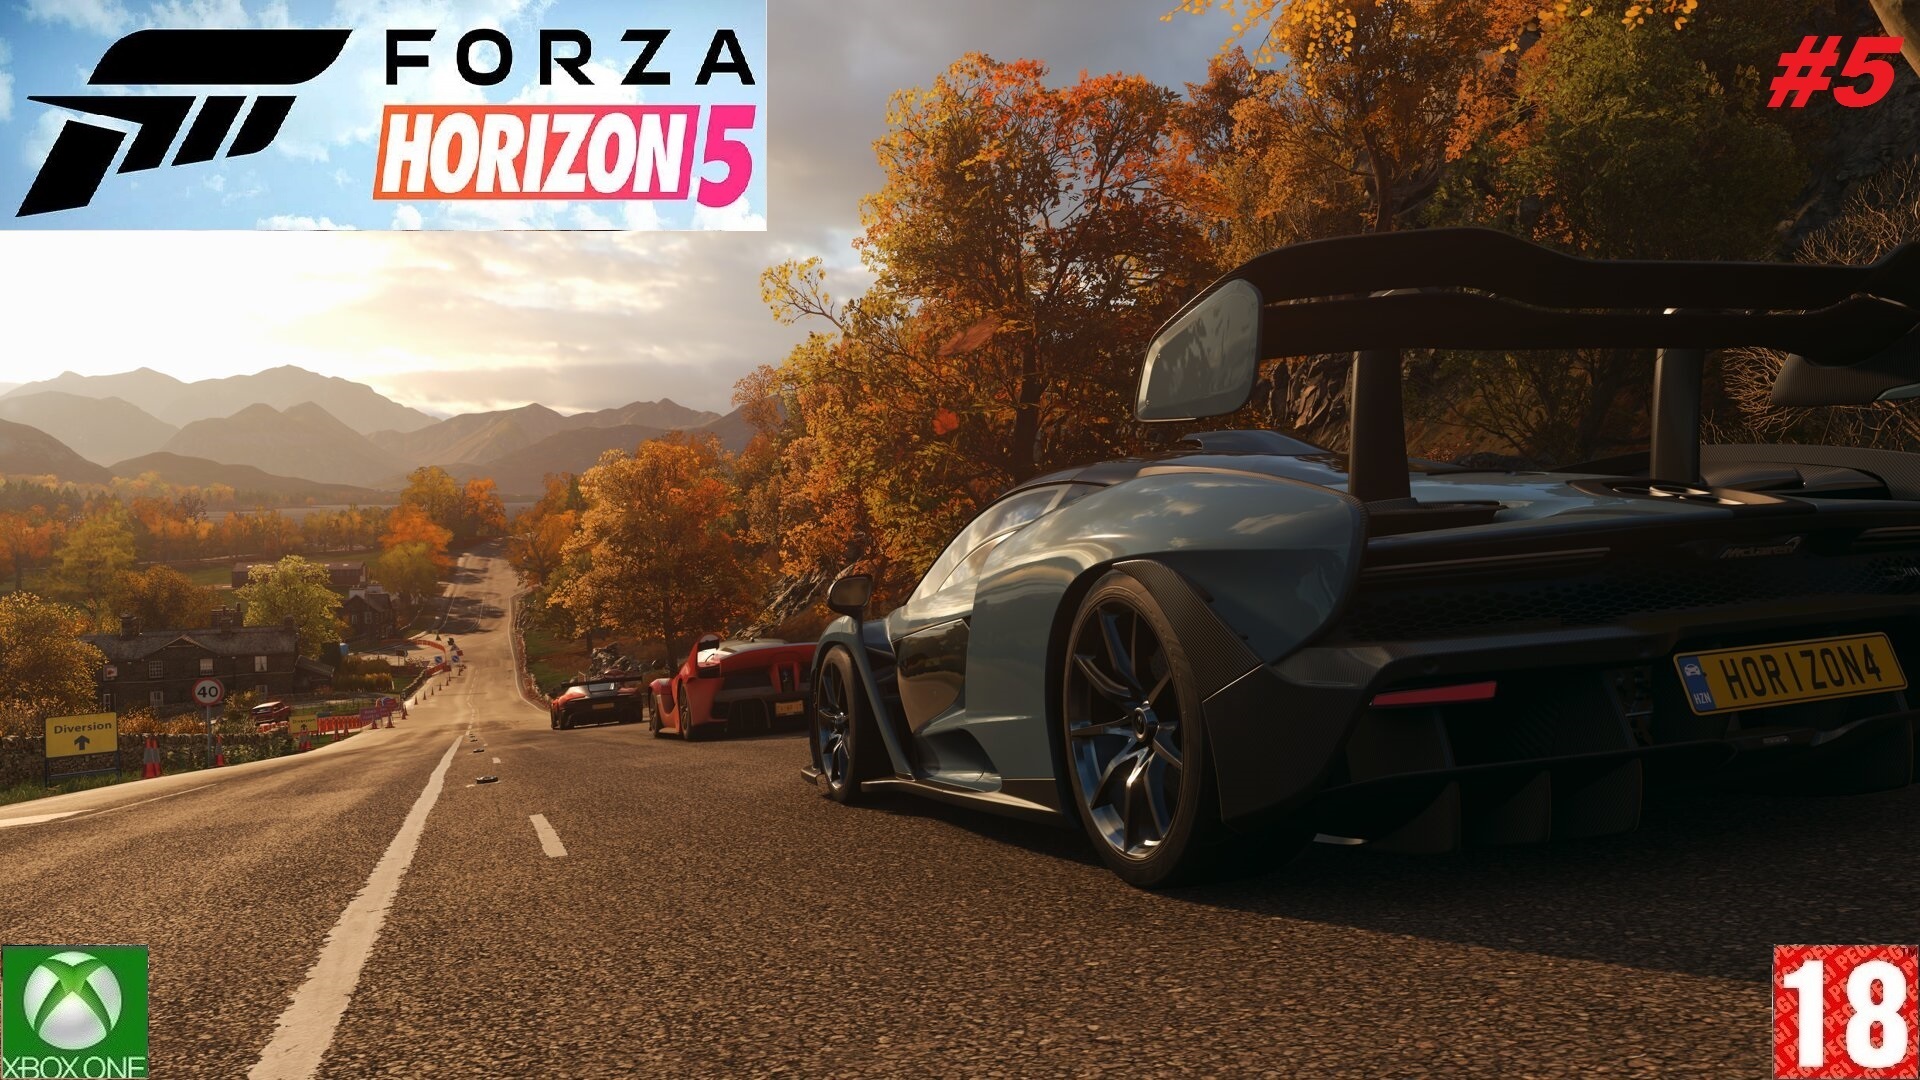 Steam is not launched forza horizon 5 на пиратке фото 58